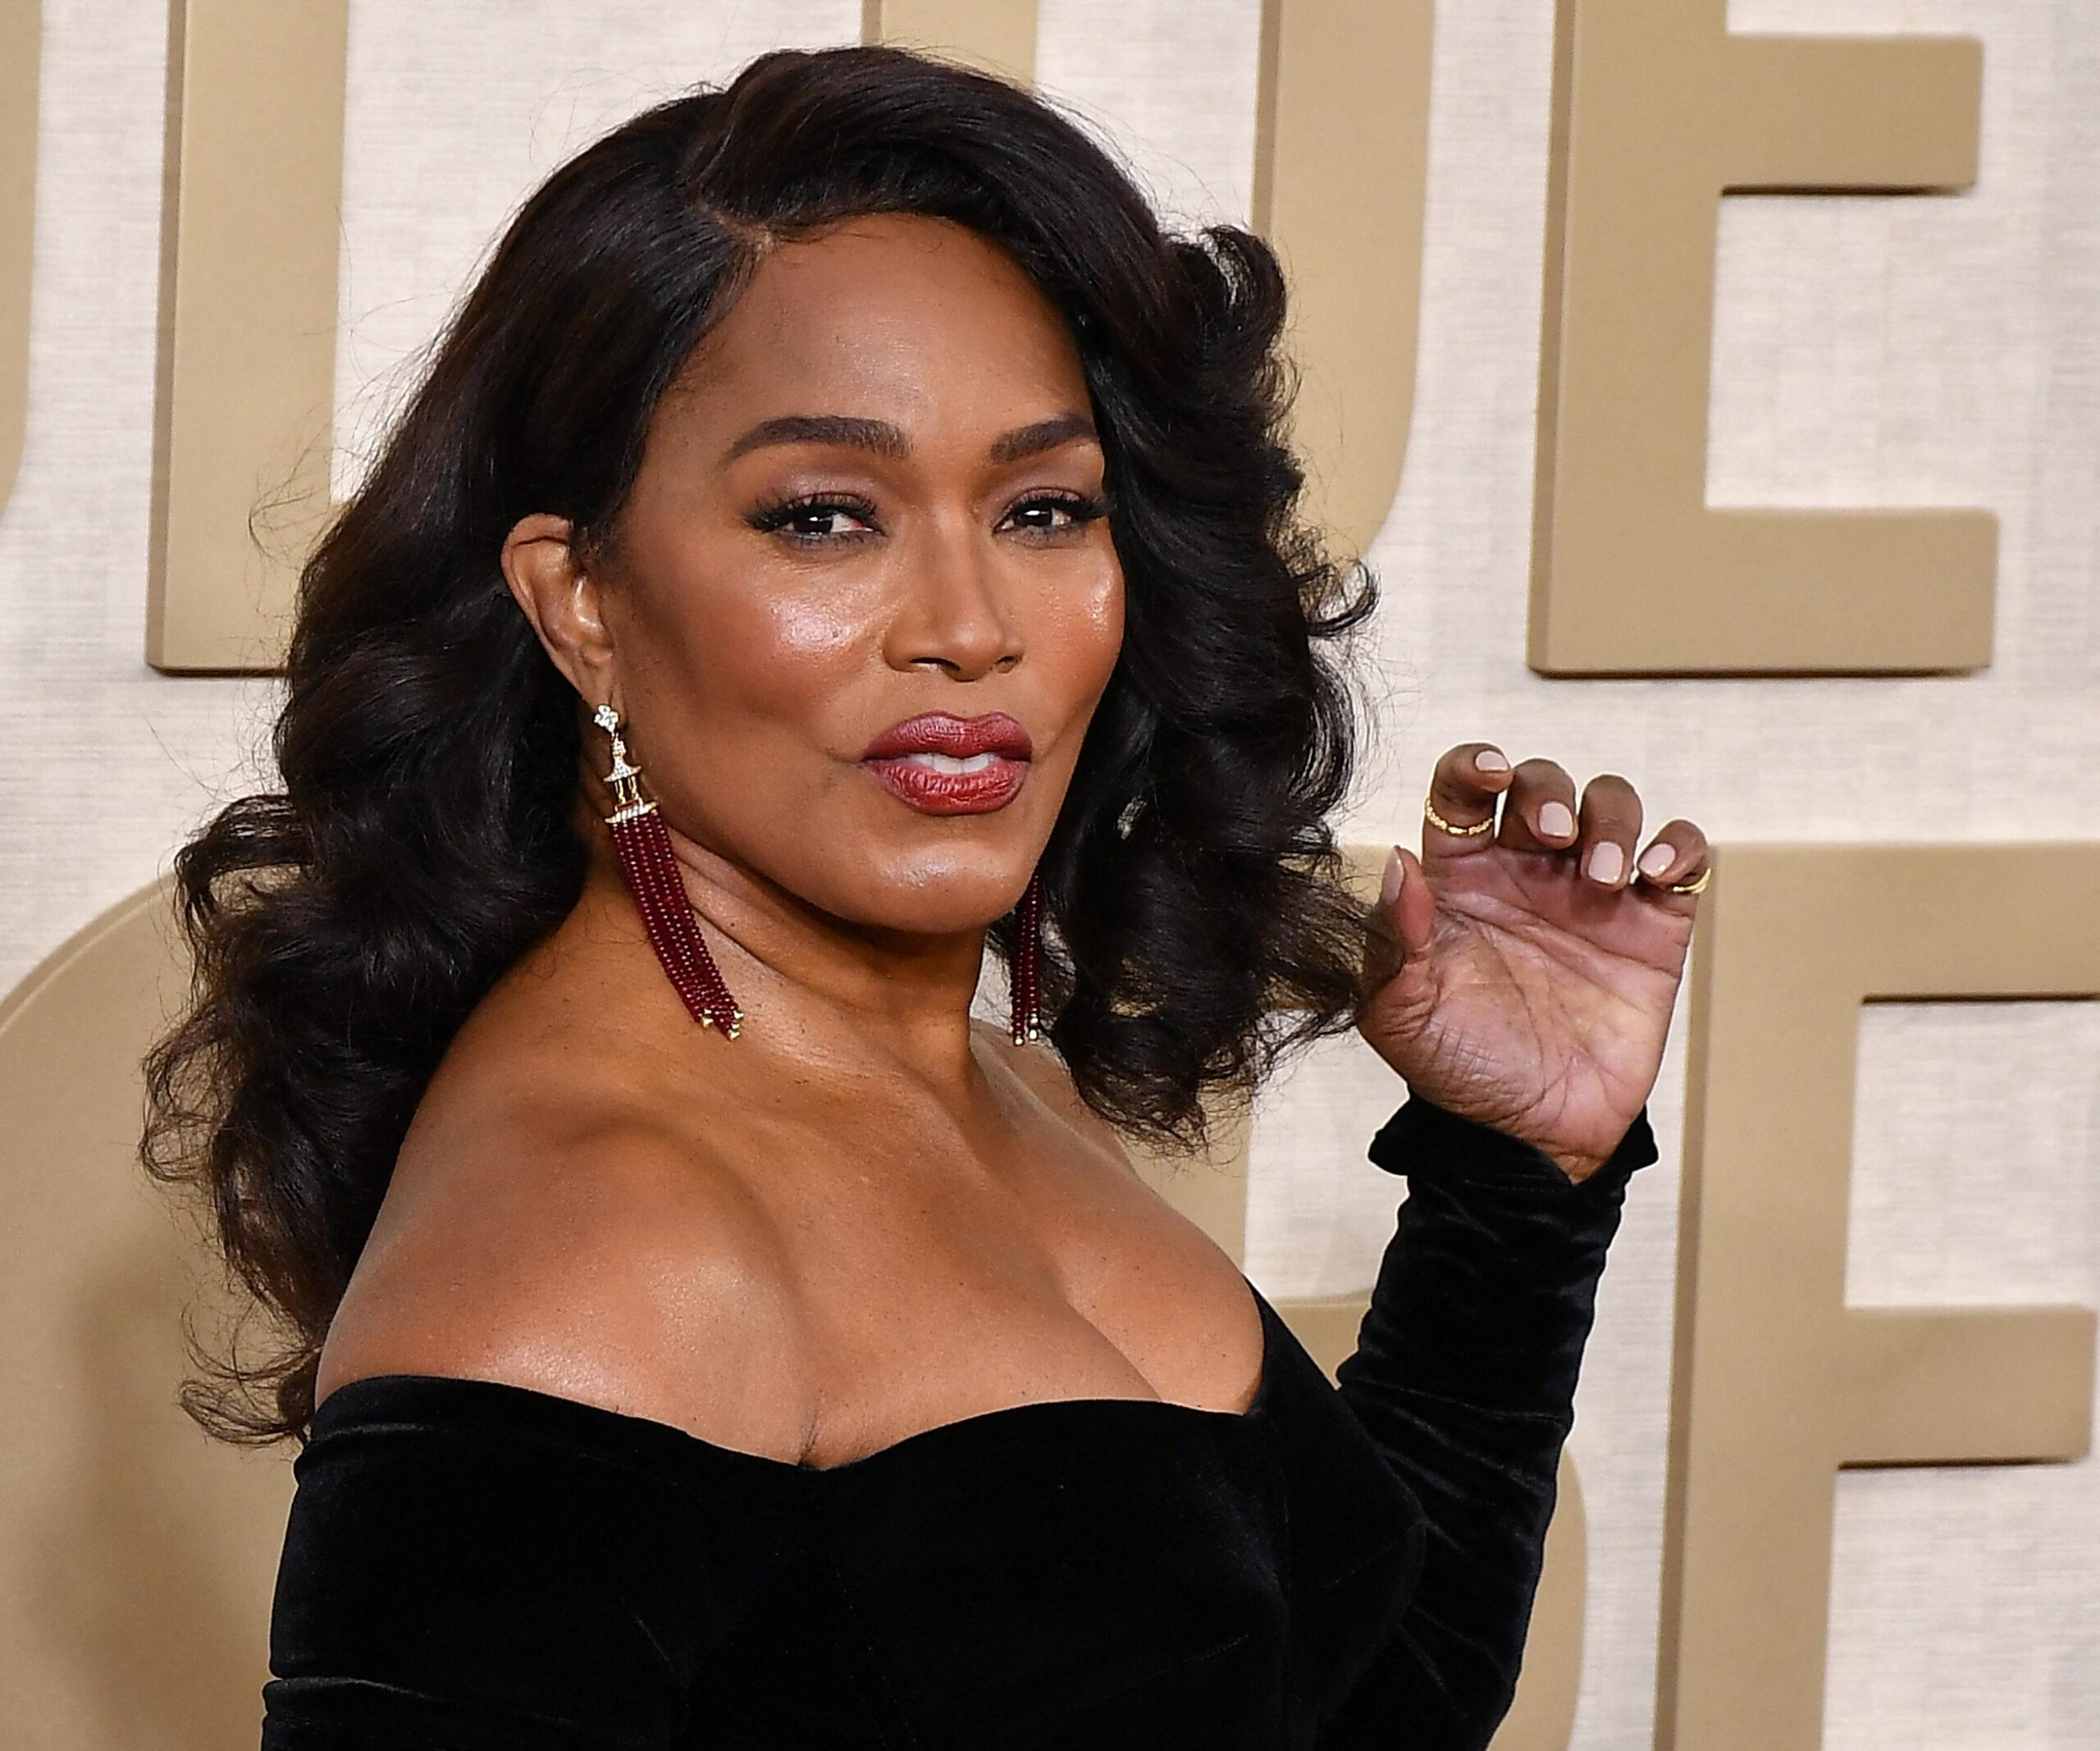 '911' Star Angela Bassett Reveals She 'Might Have to Go to Therapy'